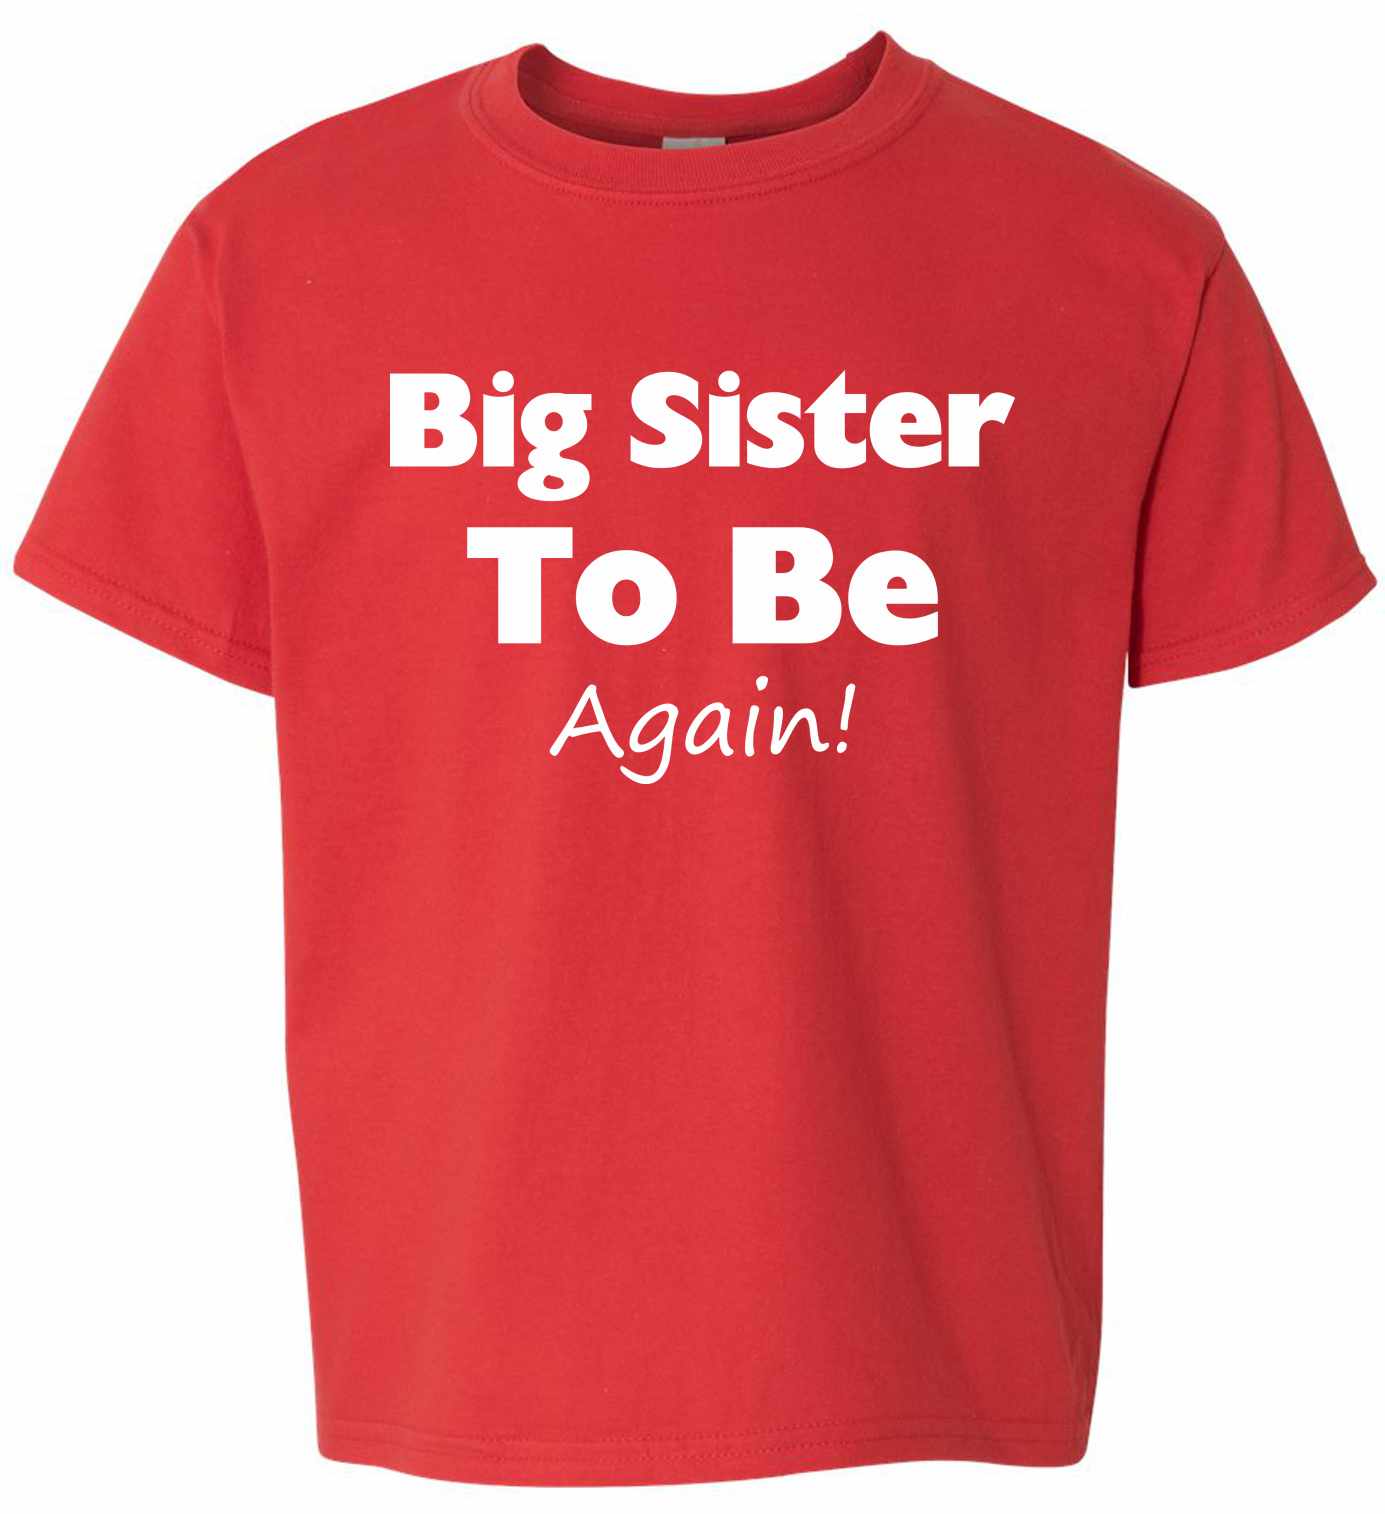 Big Sister To Be Again on Kids T-Shirt (#877-201)